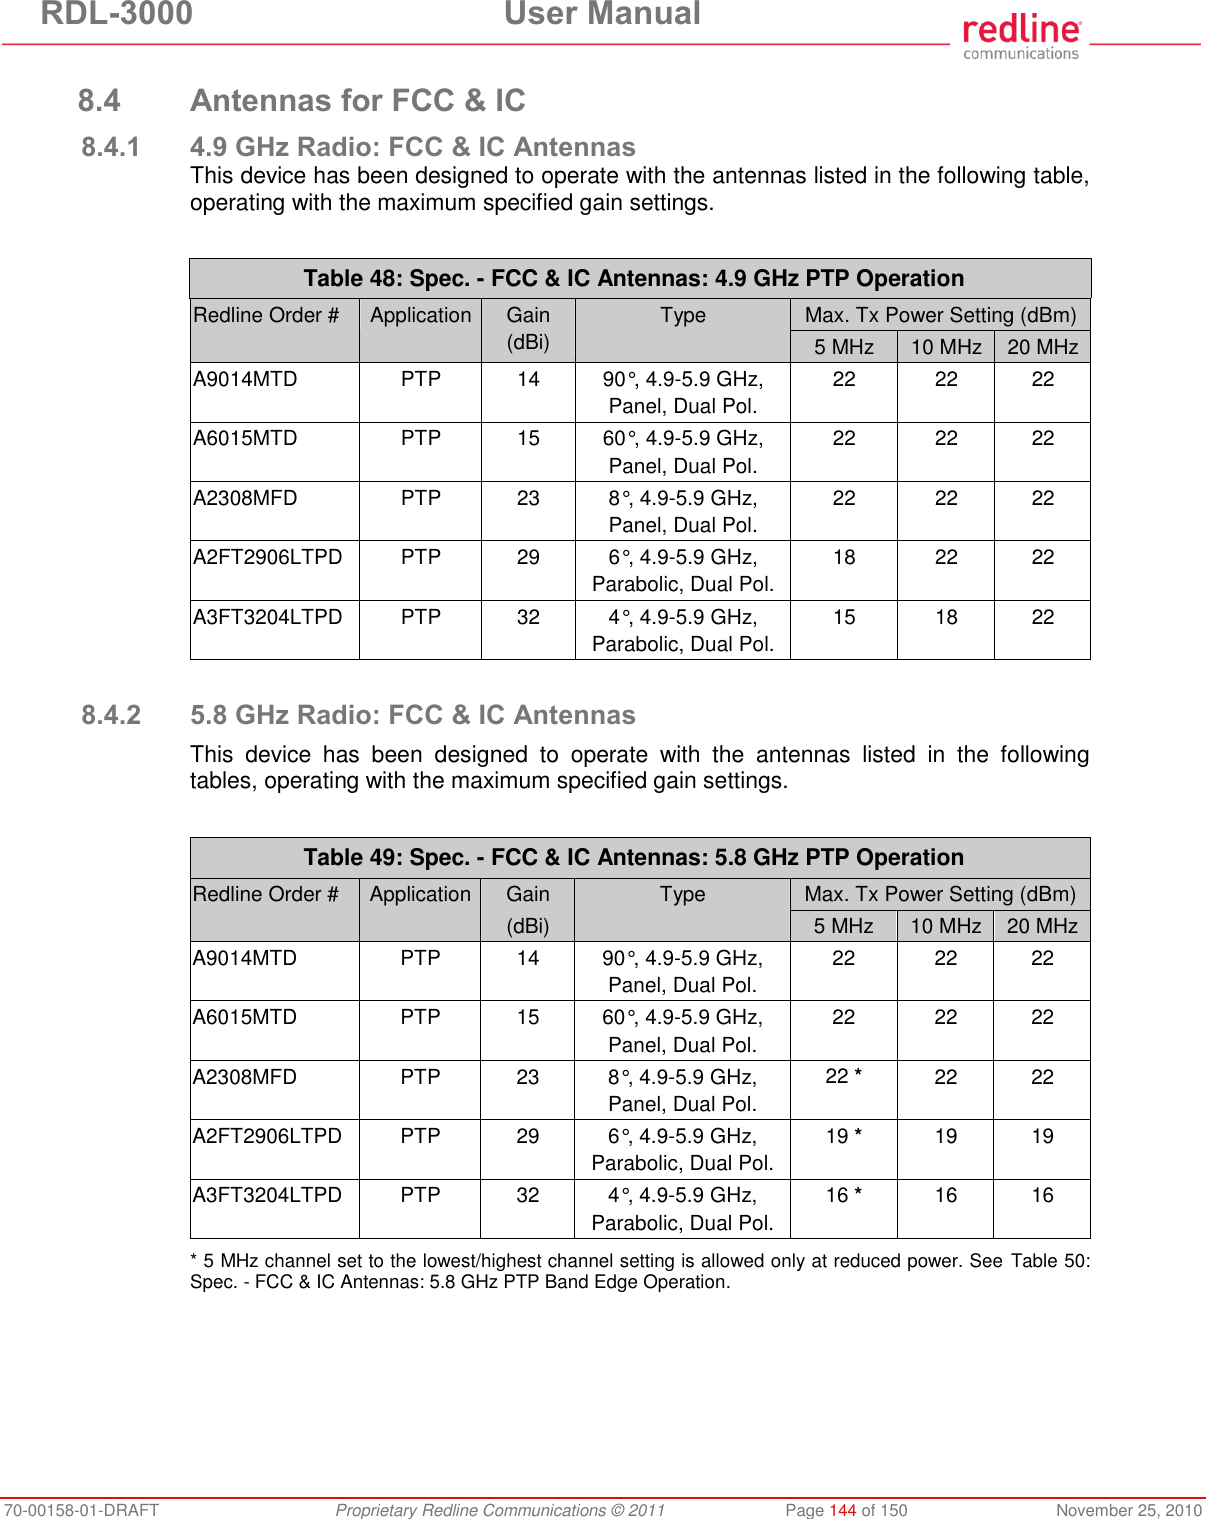 RDL-3000  User Manual 70-00158-01-DRAFT  Proprietary Redline Communications © 2011  Page 144 of 150  November 25, 2010  8.4 Antennas for FCC &amp; IC 8.4.1 4.9 GHz Radio: FCC &amp; IC Antennas This device has been designed to operate with the antennas listed in the following table, operating with the maximum specified gain settings.  Table 48: Spec. - FCC &amp; IC Antennas: 4.9 GHz PTP Operation Redline Order # Application Gain (dBi) Type Max. Tx Power Setting (dBm) 5 MHz 10 MHz 20 MHz A9014MTD PTP 14 90°, 4.9-5.9 GHz, Panel, Dual Pol. 22 22 22 A6015MTD PTP 15 60°, 4.9-5.9 GHz, Panel, Dual Pol. 22 22 22 A2308MFD PTP 23 8°, 4.9-5.9 GHz, Panel, Dual Pol. 22 22 22 A2FT2906LTPD PTP 29 6°, 4.9-5.9 GHz, Parabolic, Dual Pol. 18 22 22 A3FT3204LTPD PTP 32 4°, 4.9-5.9 GHz, Parabolic, Dual Pol. 15 18 22  8.4.2 5.8 GHz Radio: FCC &amp; IC Antennas  This  device  has  been  designed  to  operate  with  the  antennas  listed  in  the  following tables, operating with the maximum specified gain settings.  Table 49: Spec. - FCC &amp; IC Antennas: 5.8 GHz PTP Operation Redline Order # Application Gain Type Max. Tx Power Setting (dBm)   (dBi)  5 MHz 10 MHz 20 MHz A9014MTD PTP 14 90°, 4.9-5.9 GHz, Panel, Dual Pol. 22 22 22 A6015MTD PTP 15 60°, 4.9-5.9 GHz, Panel, Dual Pol. 22 22 22 A2308MFD PTP 23 8°, 4.9-5.9 GHz, Panel, Dual Pol. 22 * 22 22 A2FT2906LTPD PTP 29 6°, 4.9-5.9 GHz, Parabolic, Dual Pol. 19 * 19 19 A3FT3204LTPD PTP 32 4°, 4.9-5.9 GHz, Parabolic, Dual Pol. 16 * 16 16  * 5 MHz channel set to the lowest/highest channel setting is allowed only at reduced power. See  Table 50: Spec. - FCC &amp; IC Antennas: 5.8 GHz PTP Band Edge Operation. 